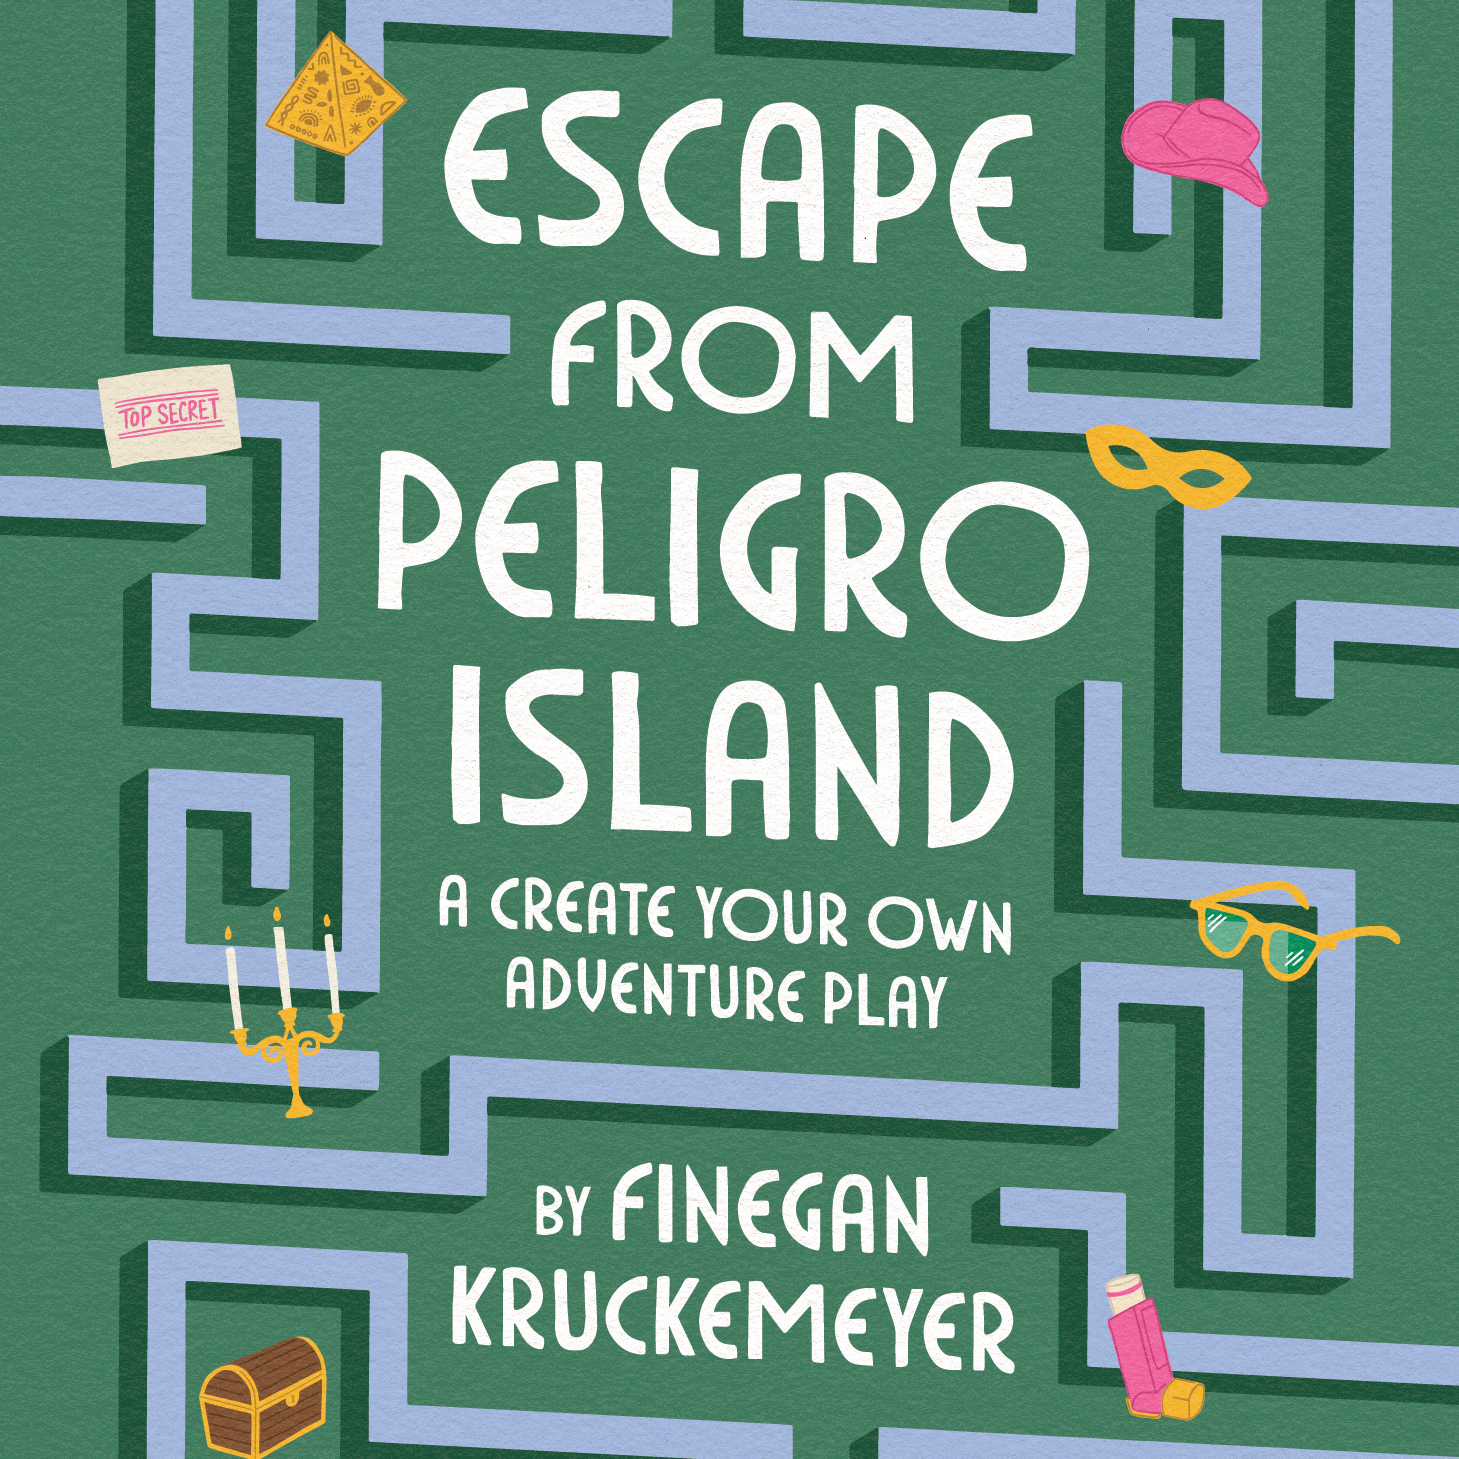 Escape from Peligro Island: A Create Your Own Adventure Play